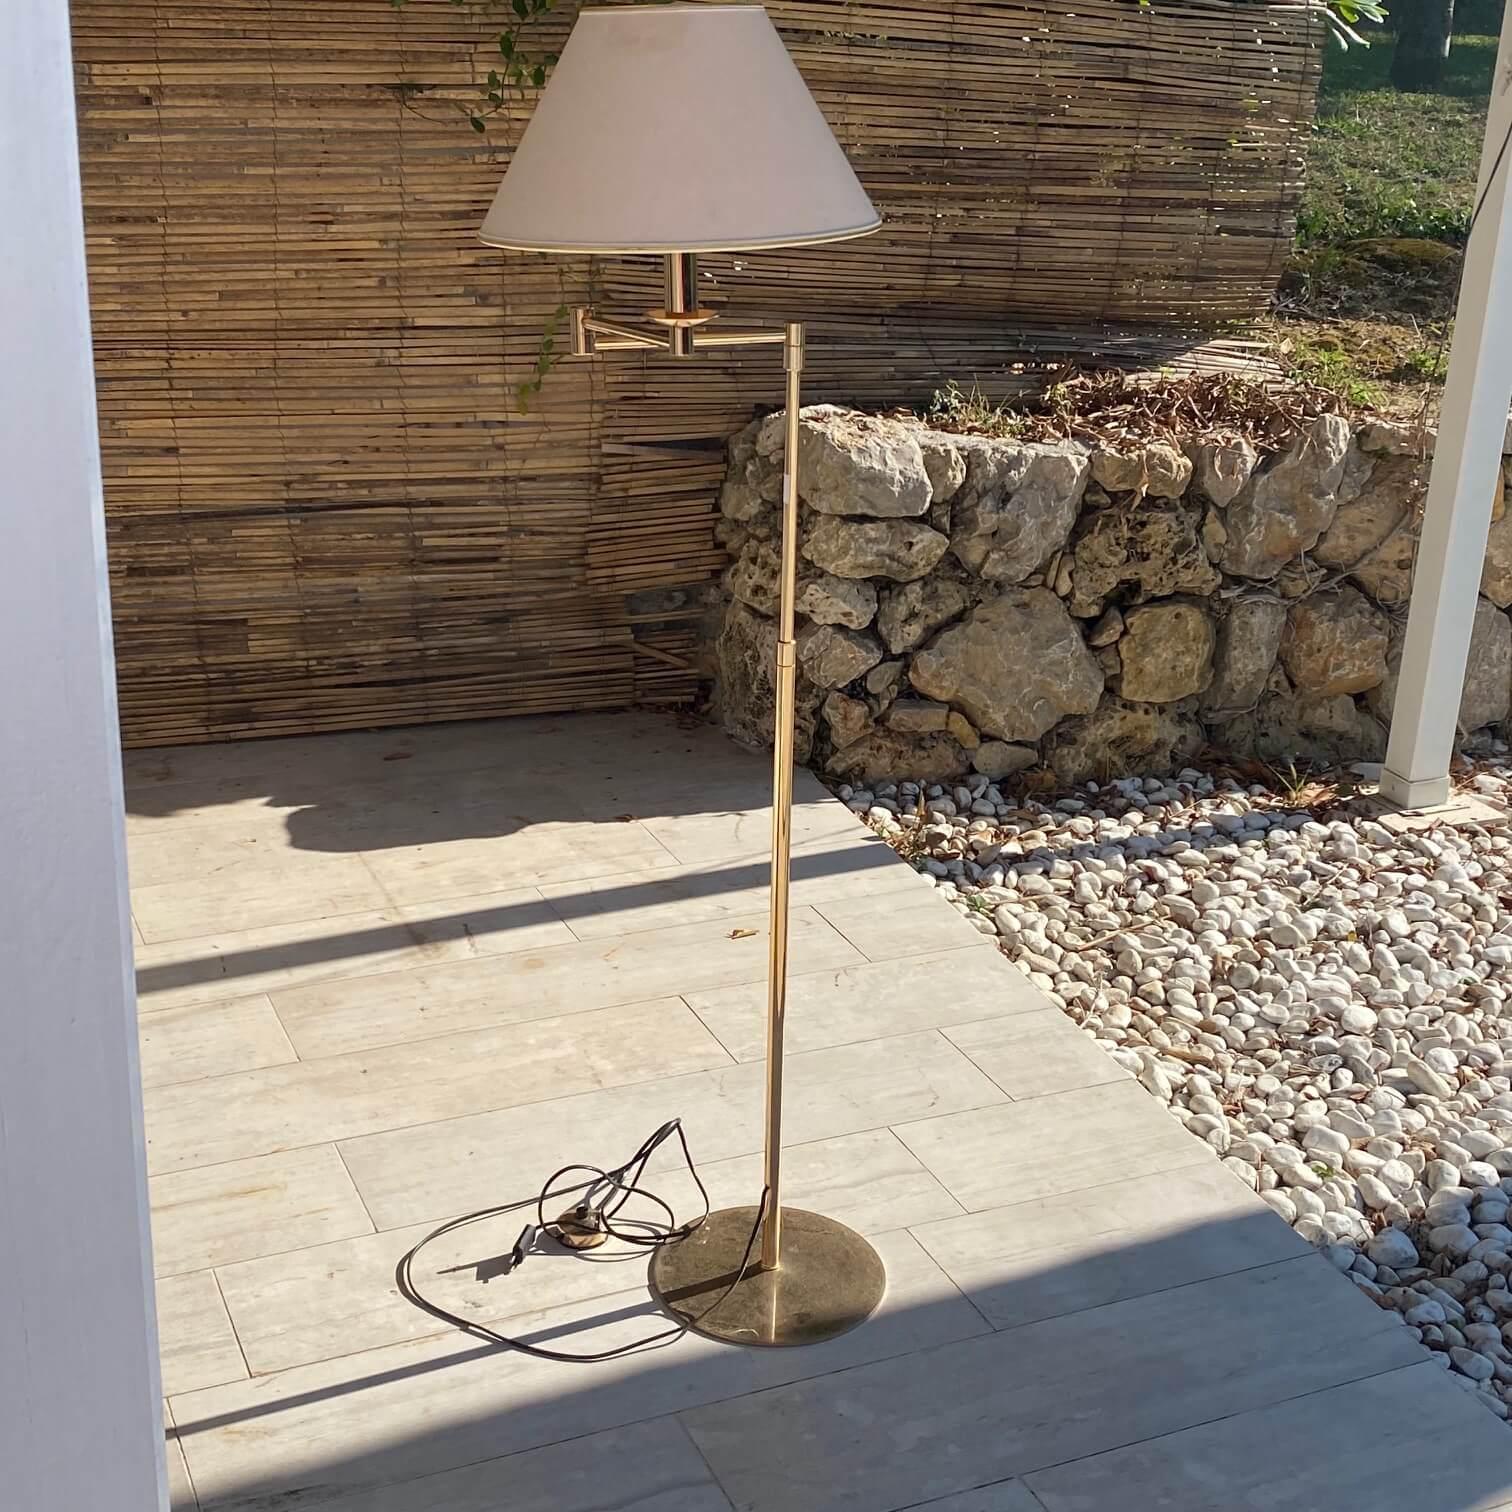 This floor lamp can have his size adjusted in two different ways. First vertically: His size varies between 148cm to 170cm thanks to his extensive stem. Then horizontally, with his articulated; two parts arm, that would give a maximum large size at